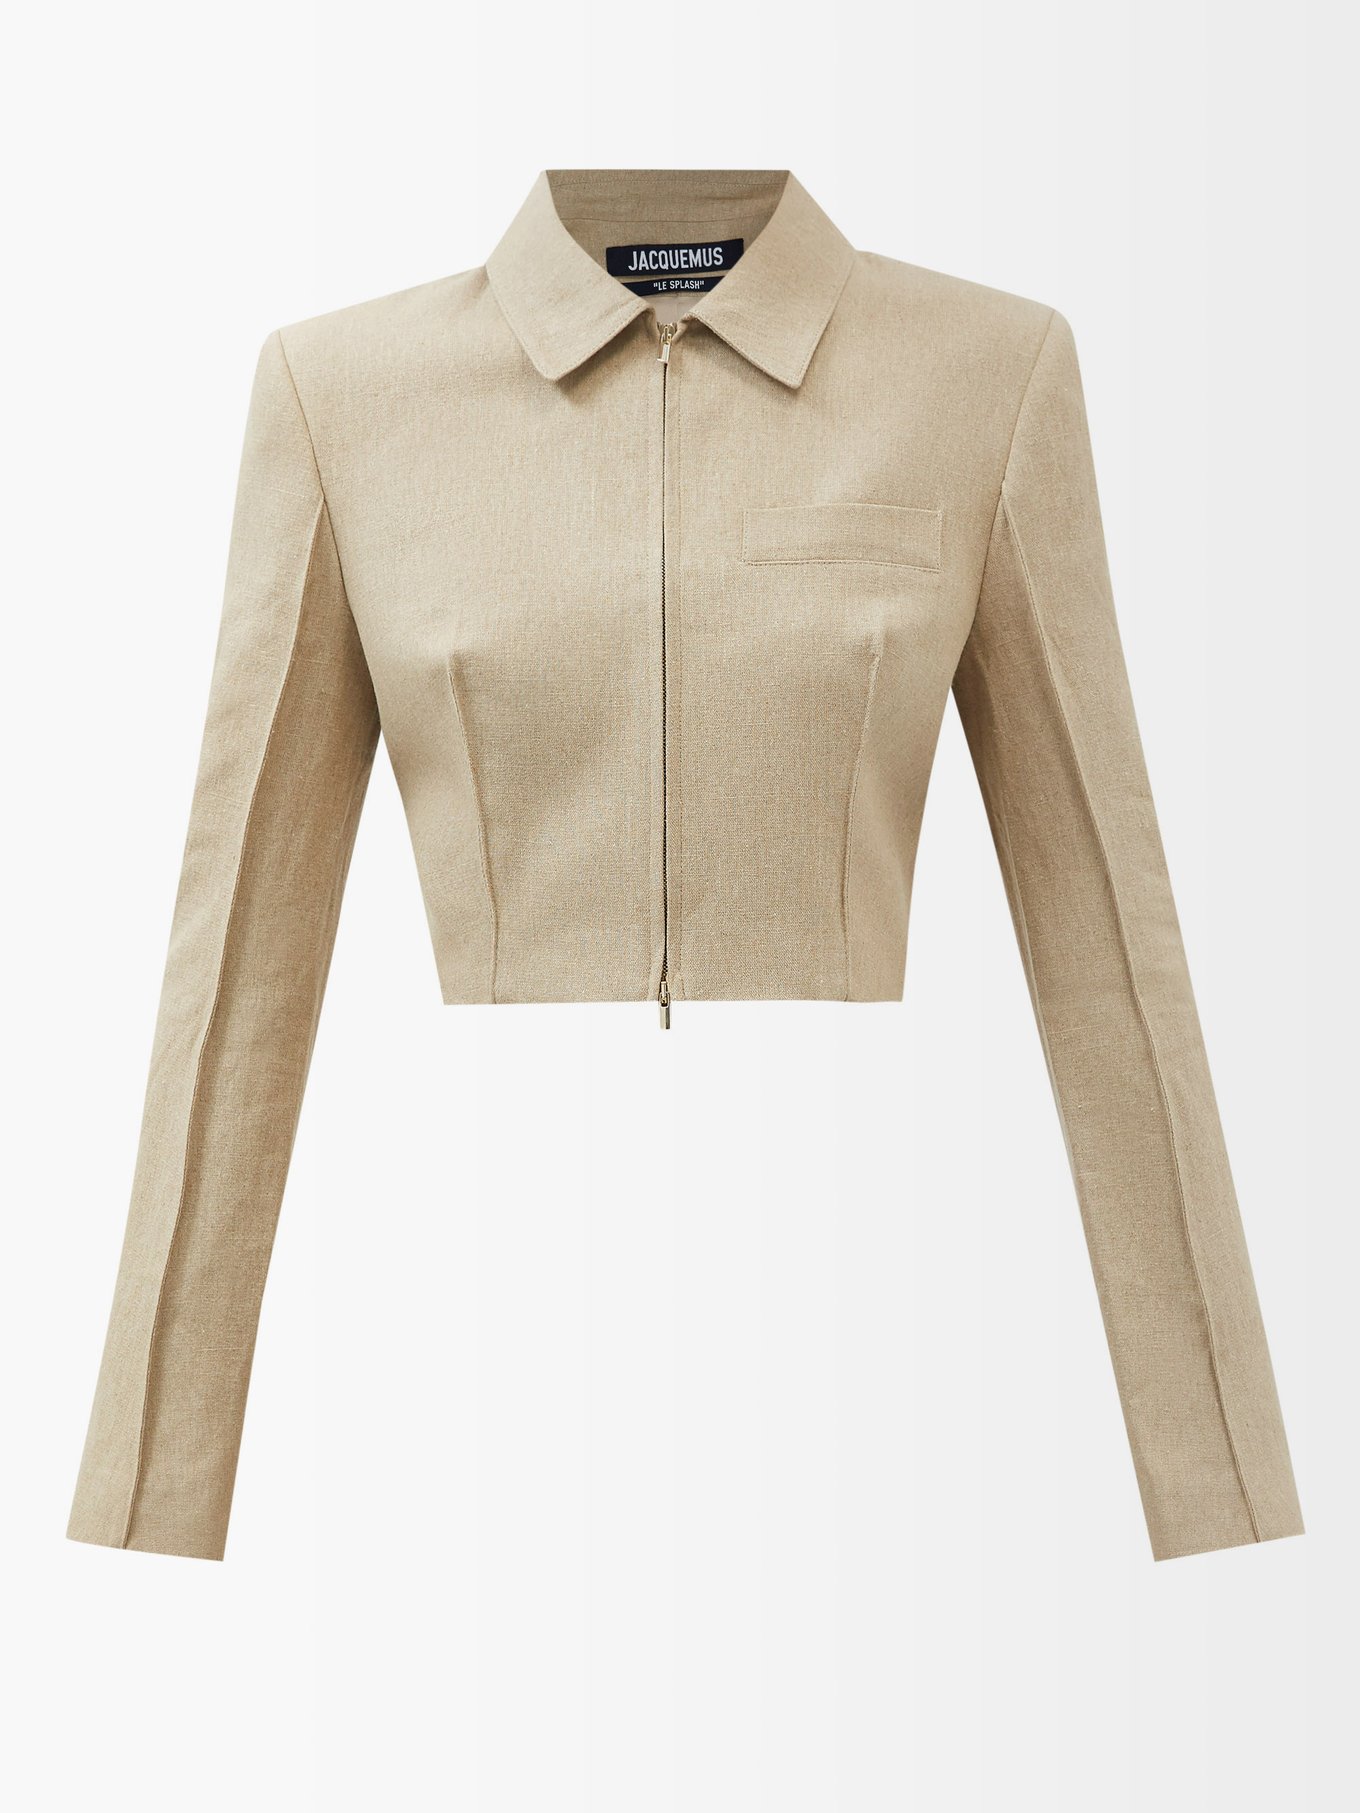 Limao cropped linen jacket | Jacquemus